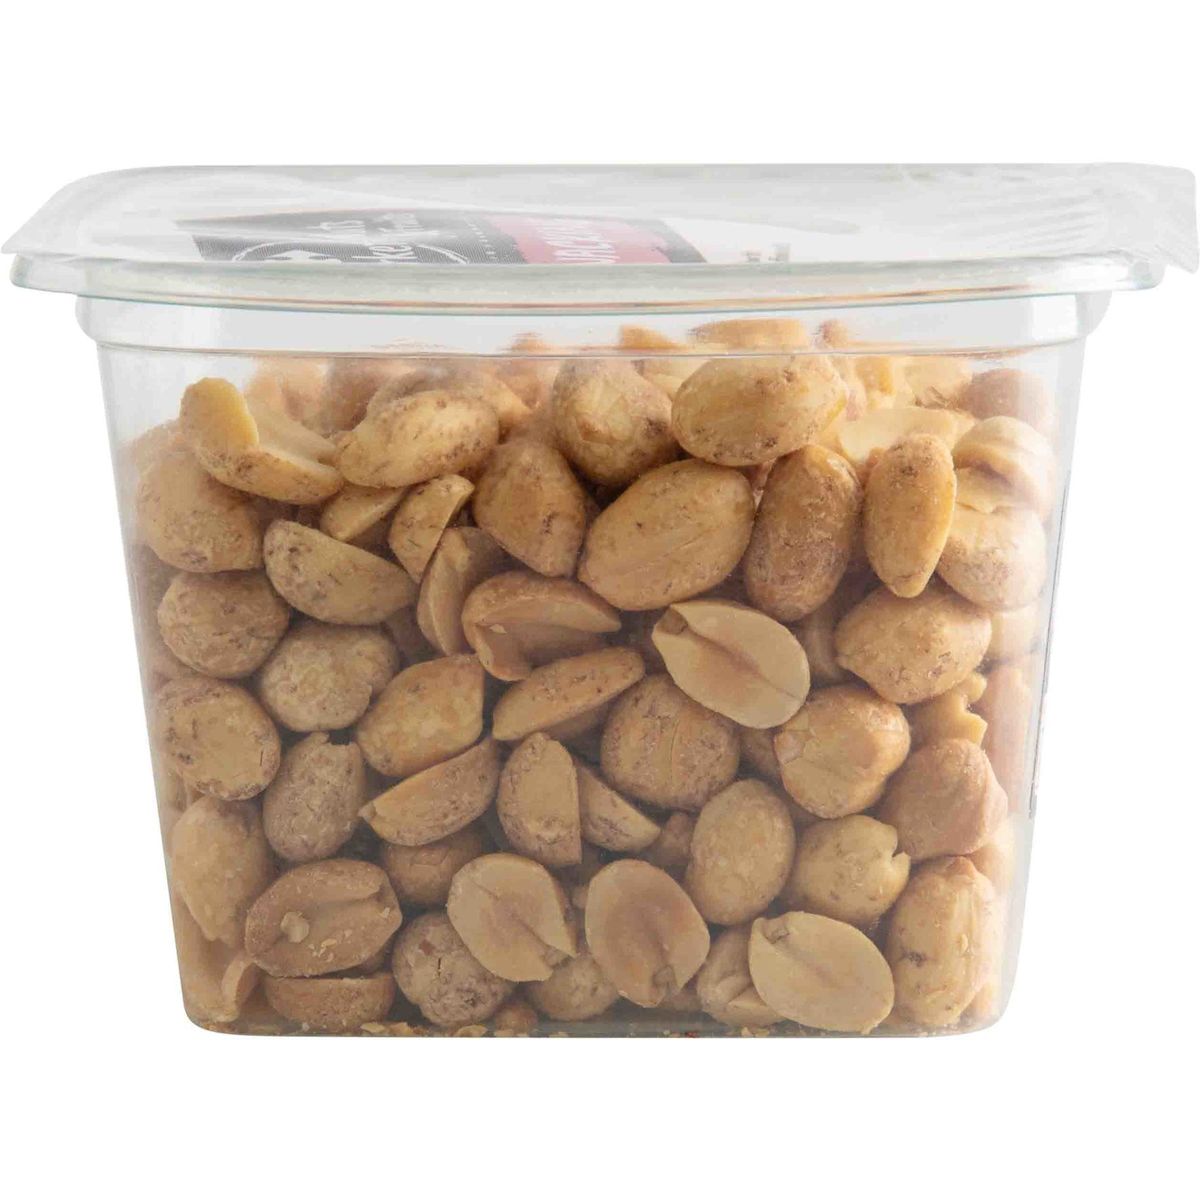 Carrefour Nuts & Fruits Snacking Ongezouten Pinda's 225 g